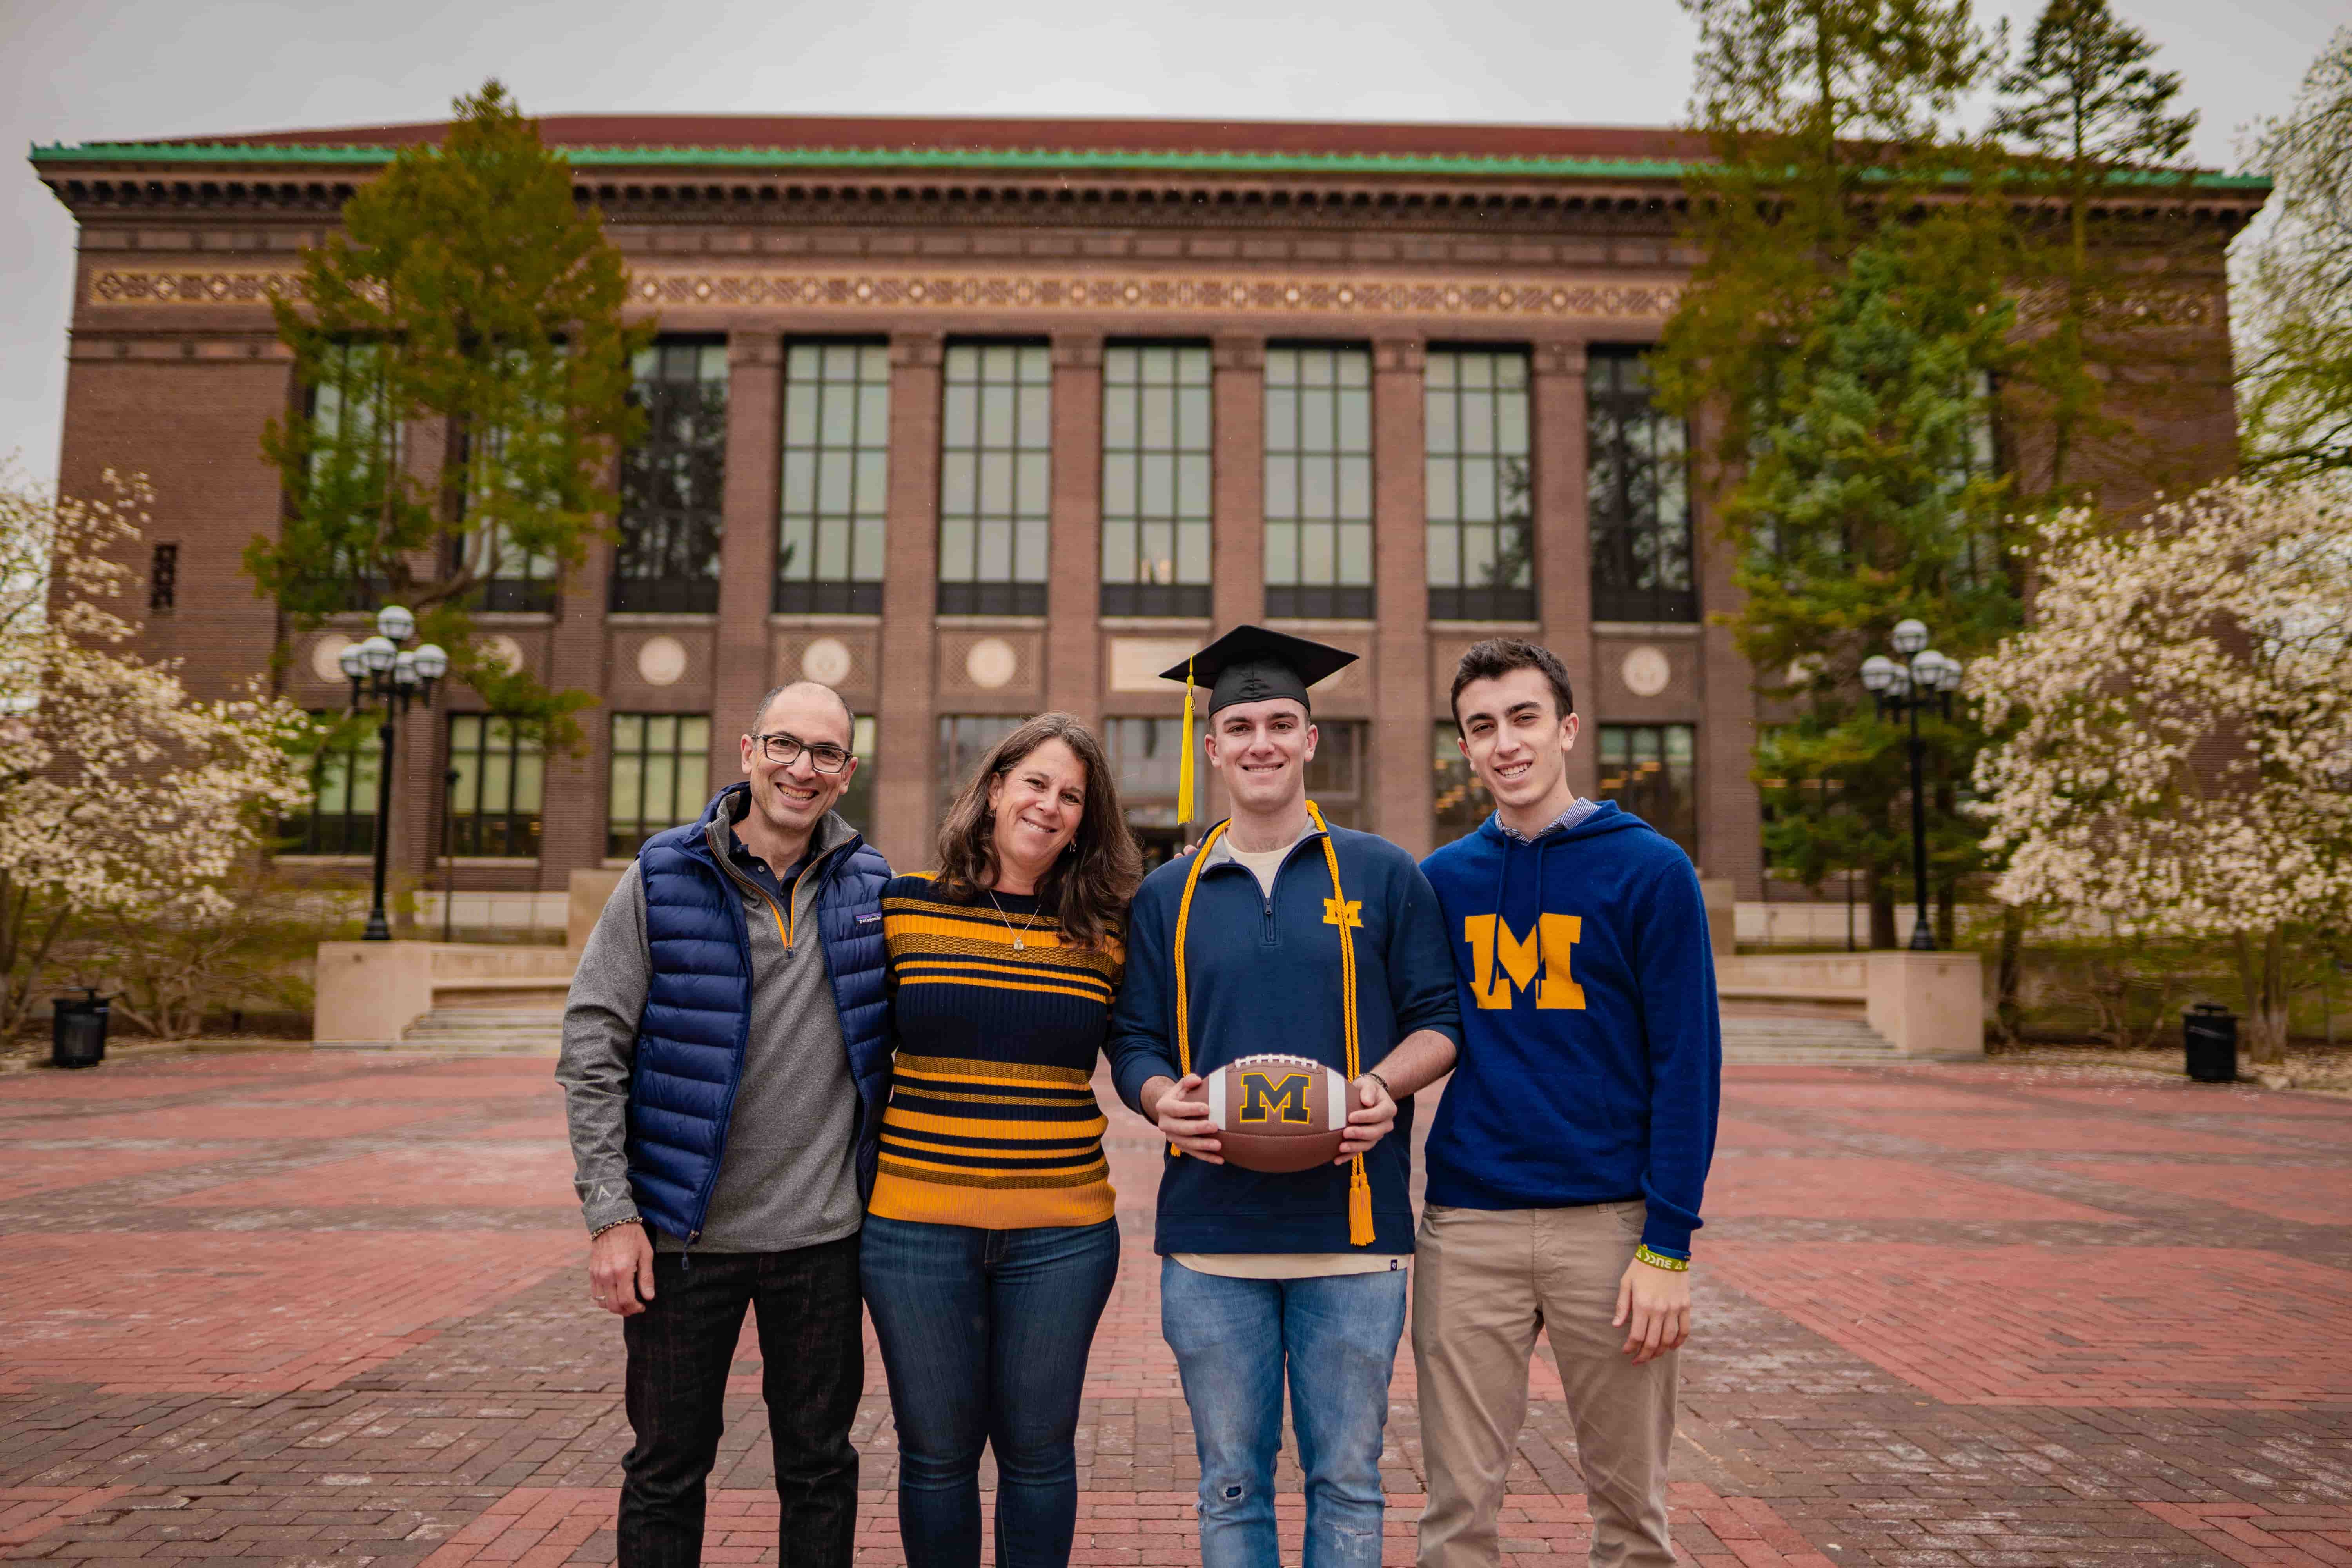 Graduate wearing cap and holding a football smiles in front of Hatcher Graduate Library with three family members.